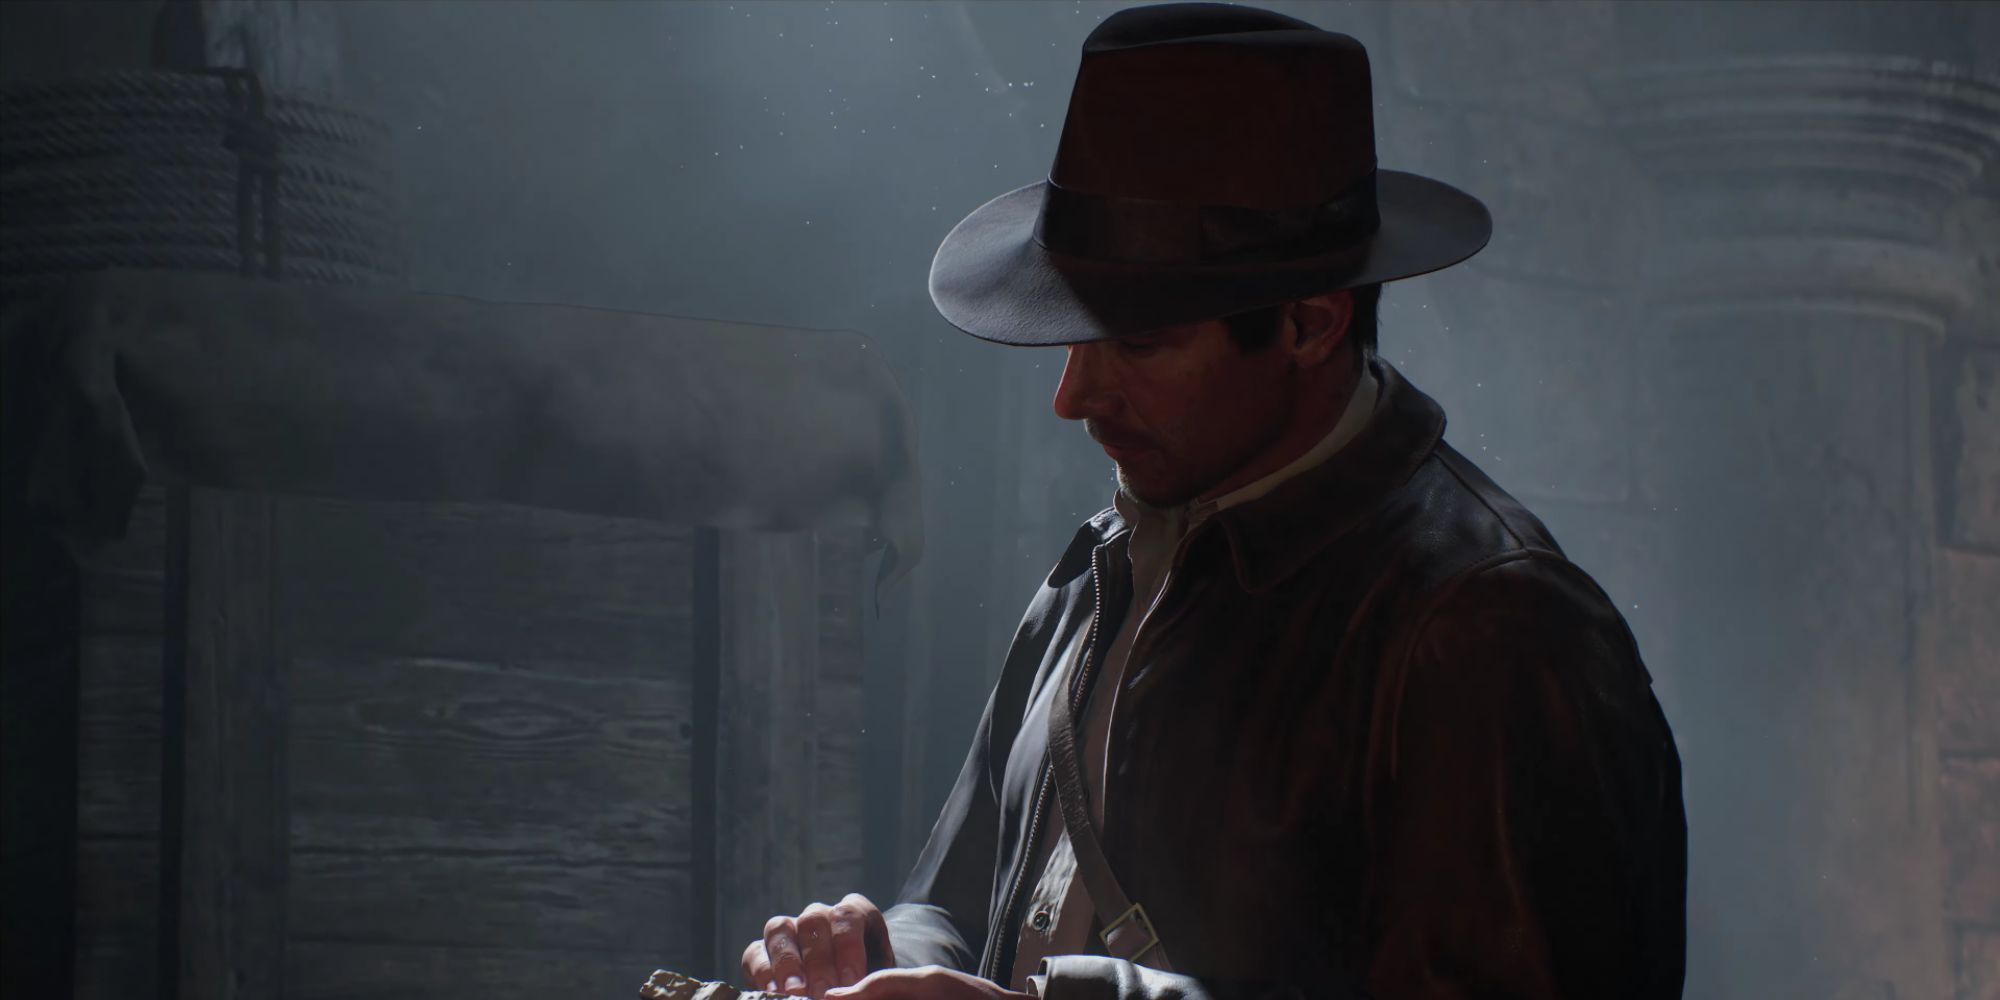 Indiana Jones taking notes in a notebook in The Great Circle.